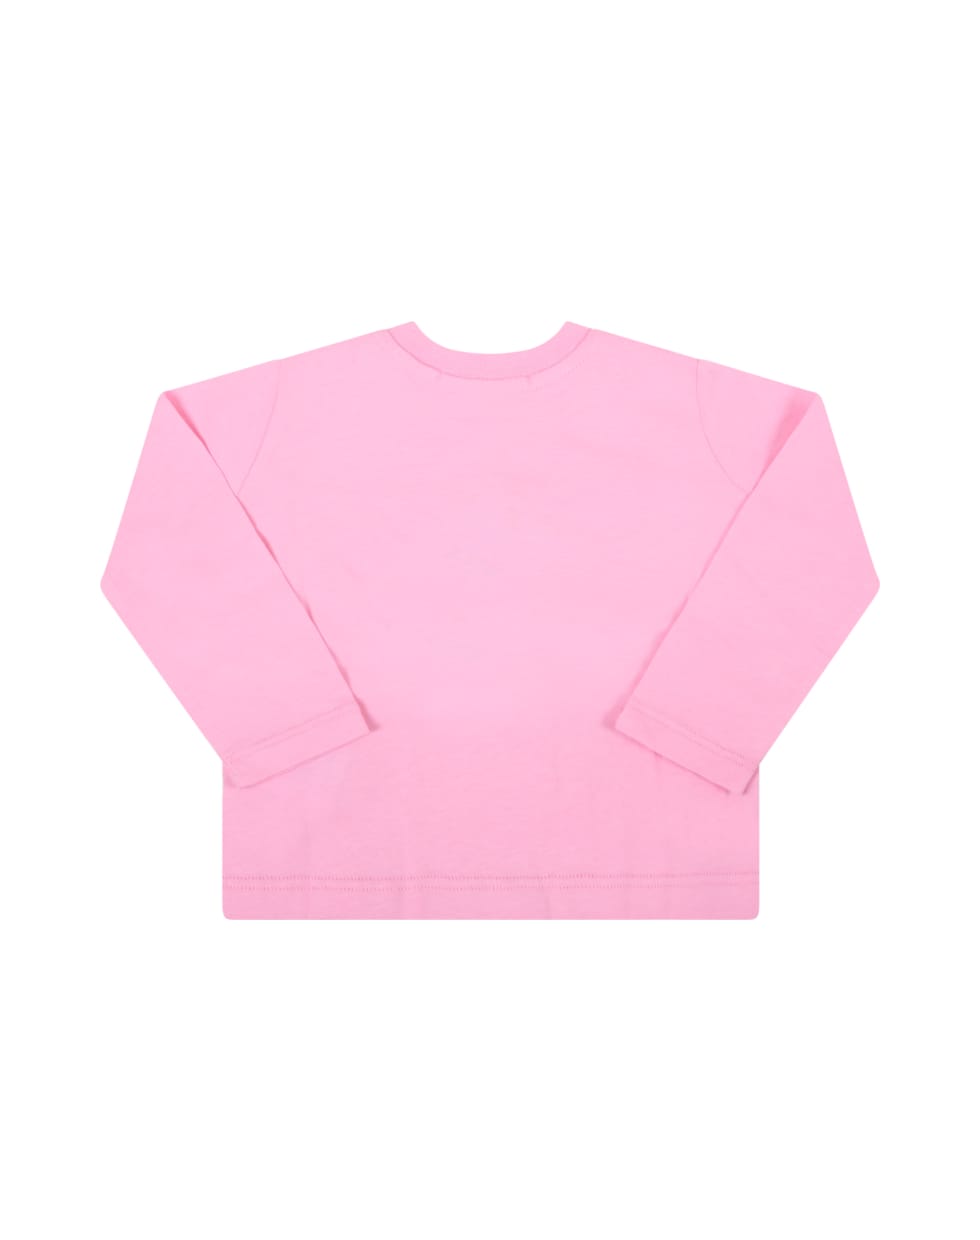 MSGM Pink T-shirt For Baby Girl With Logo - Pink